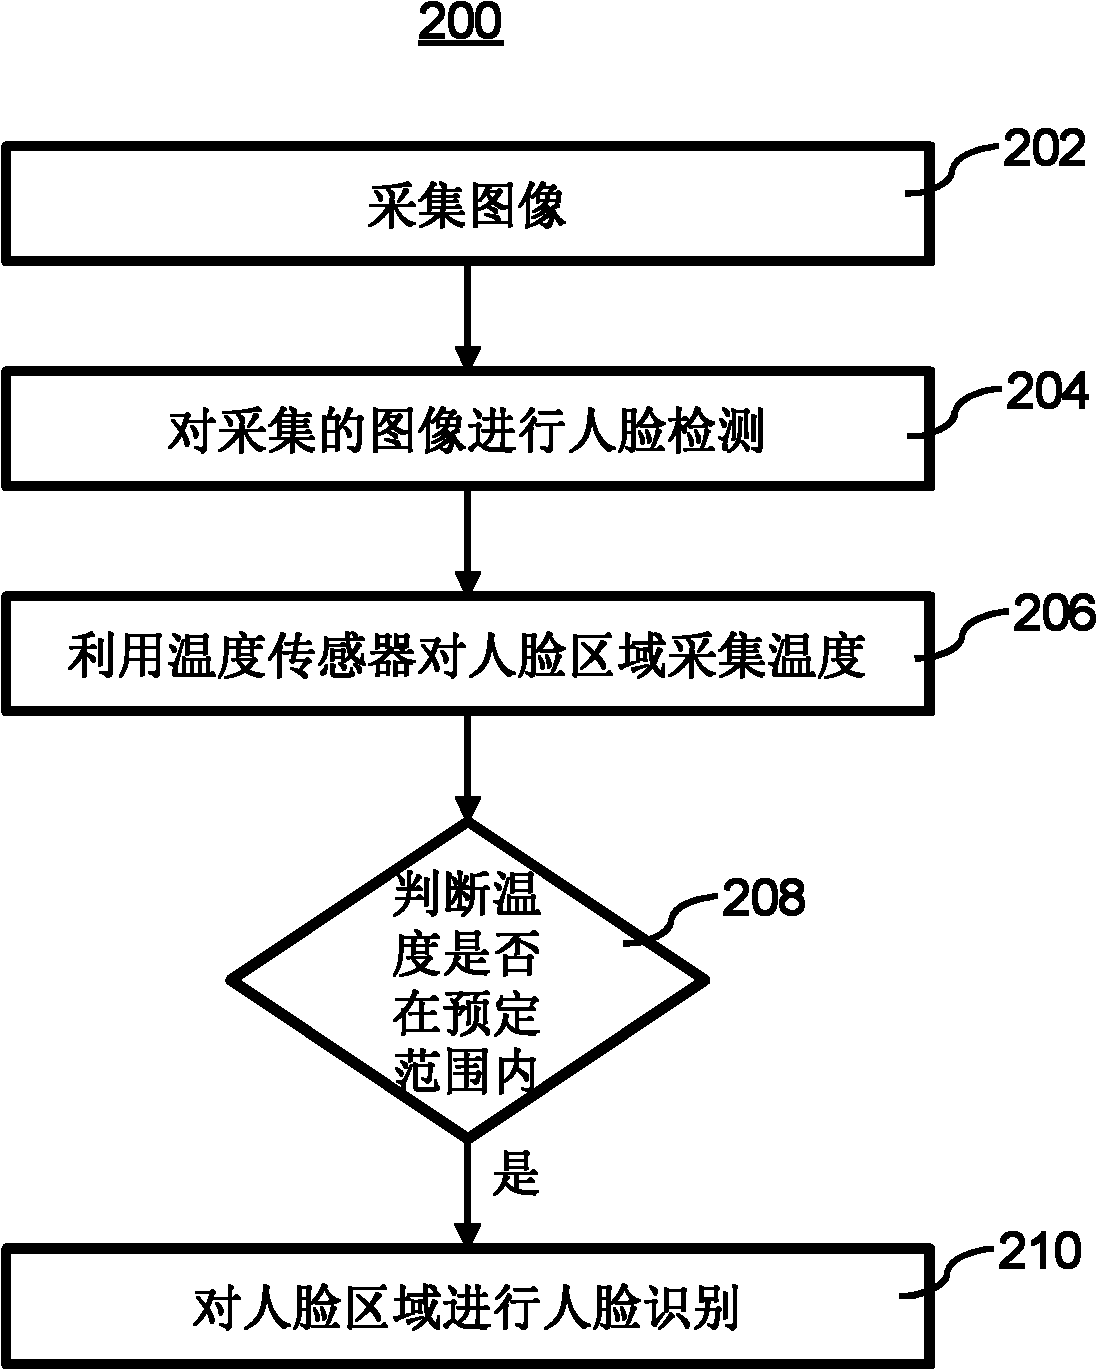 Face identification system and method